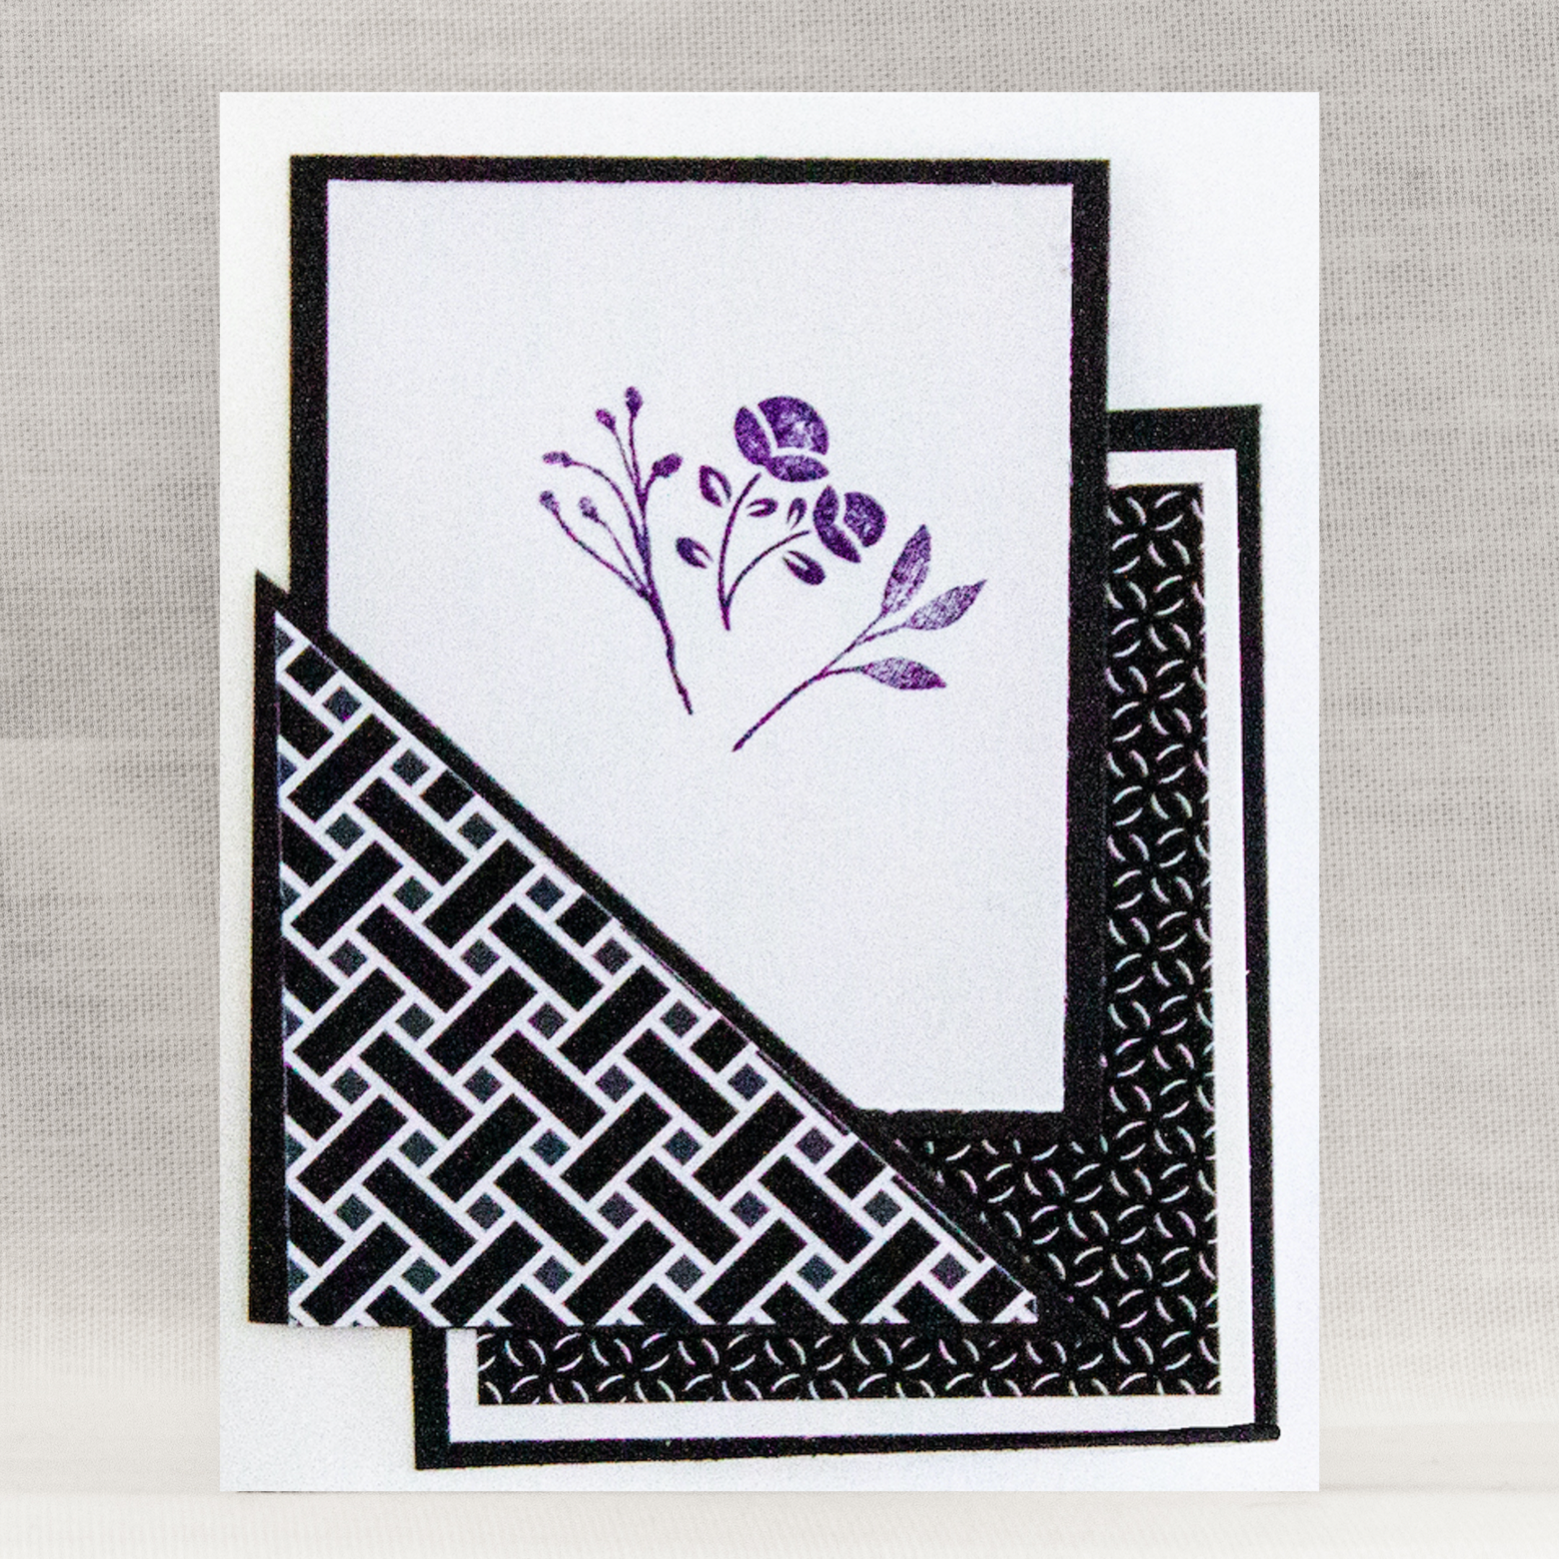 Note card with purple sprout design